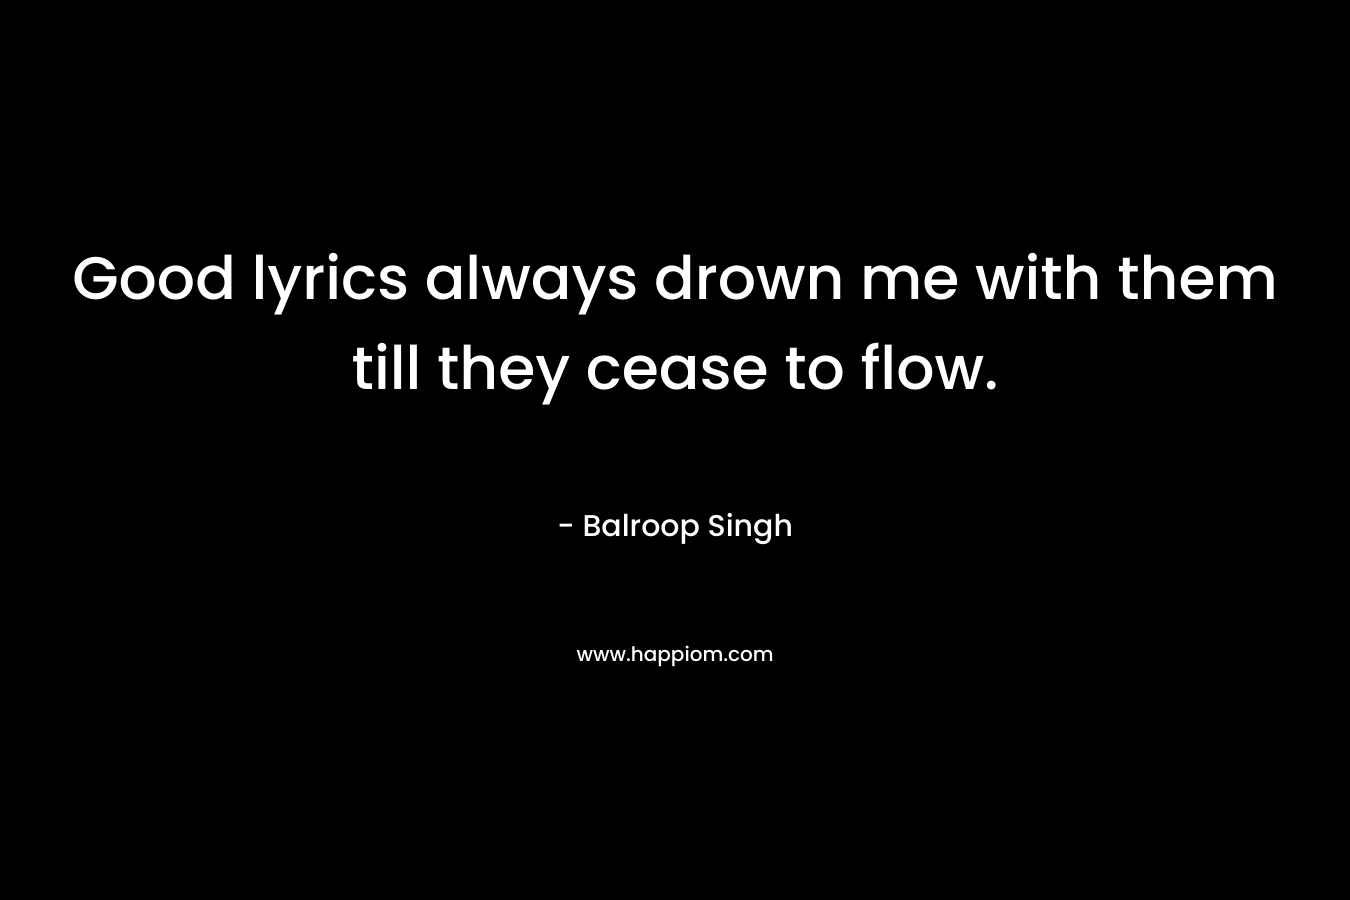 Good lyrics always drown me with them till they cease to flow.